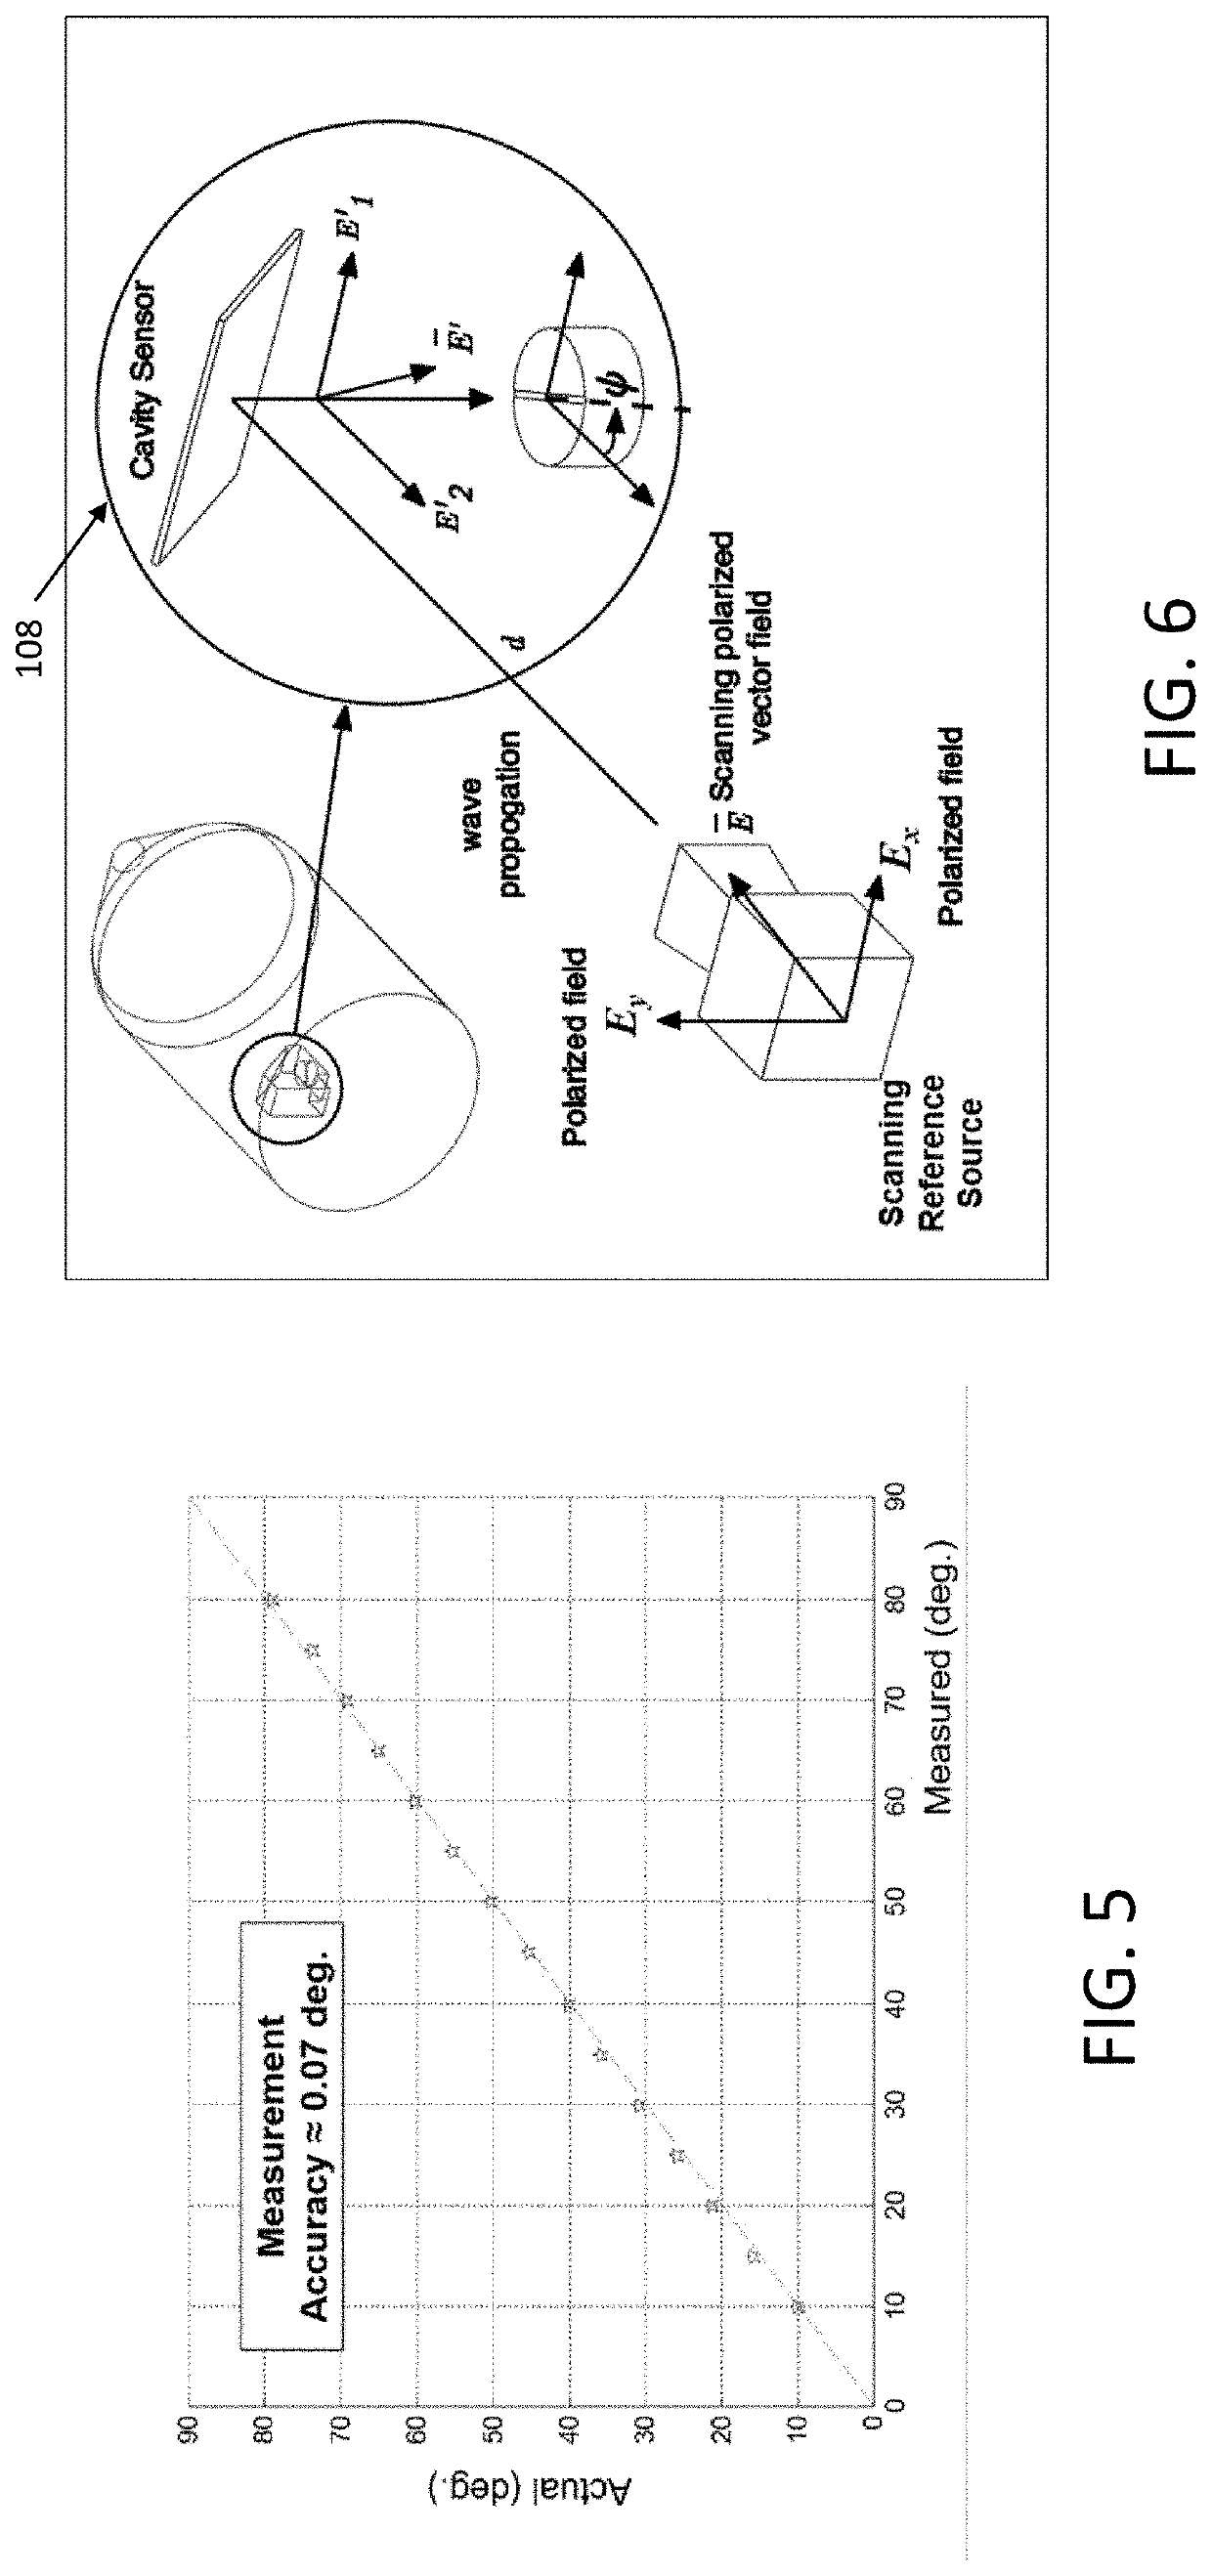 Non-GPS methods and devices for refueling remotely piloted aircraft